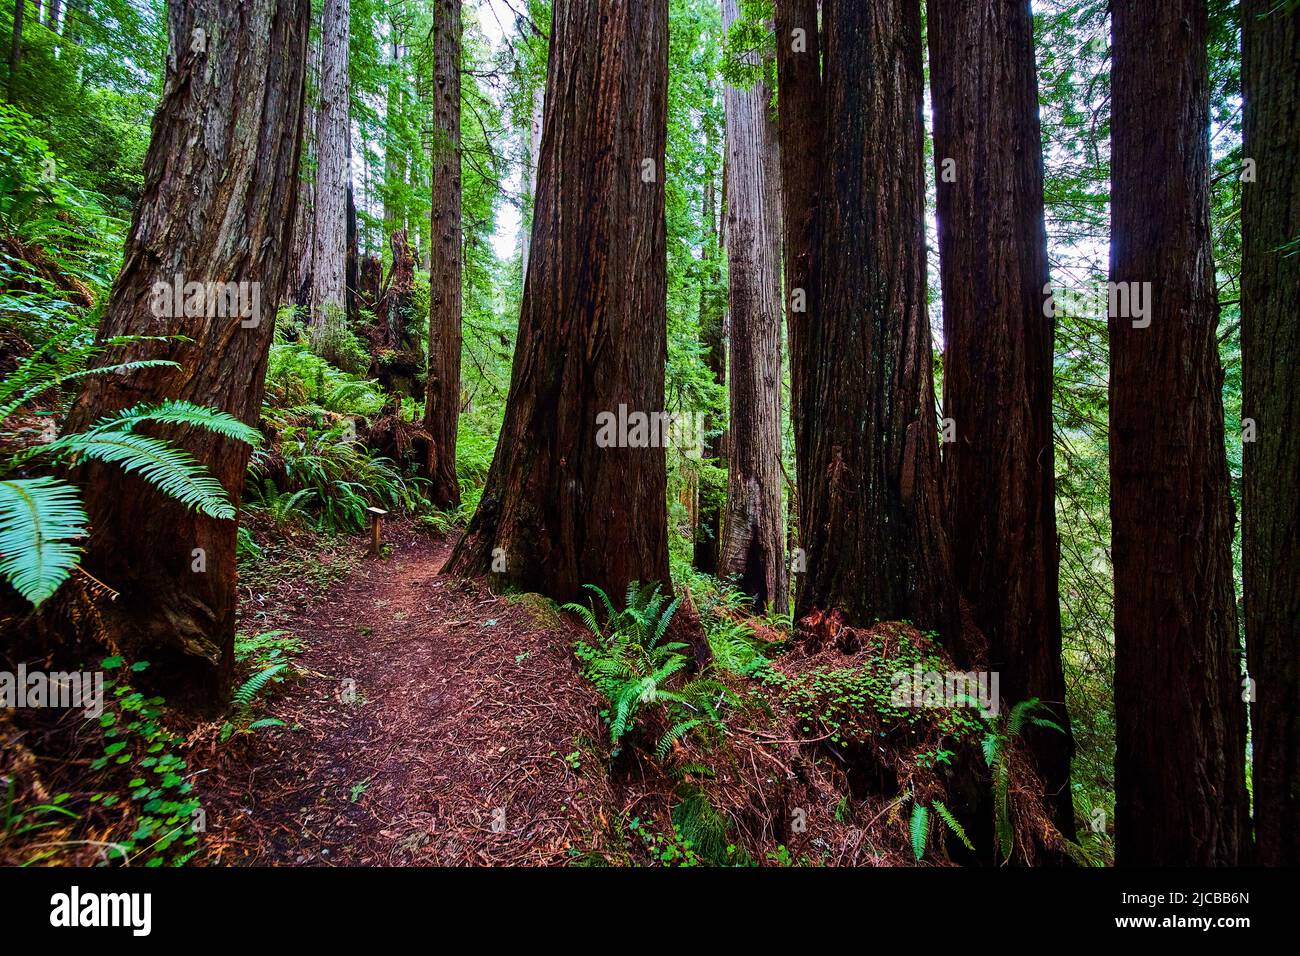 Redwood trees surround hiking path in California forest Stock Photo